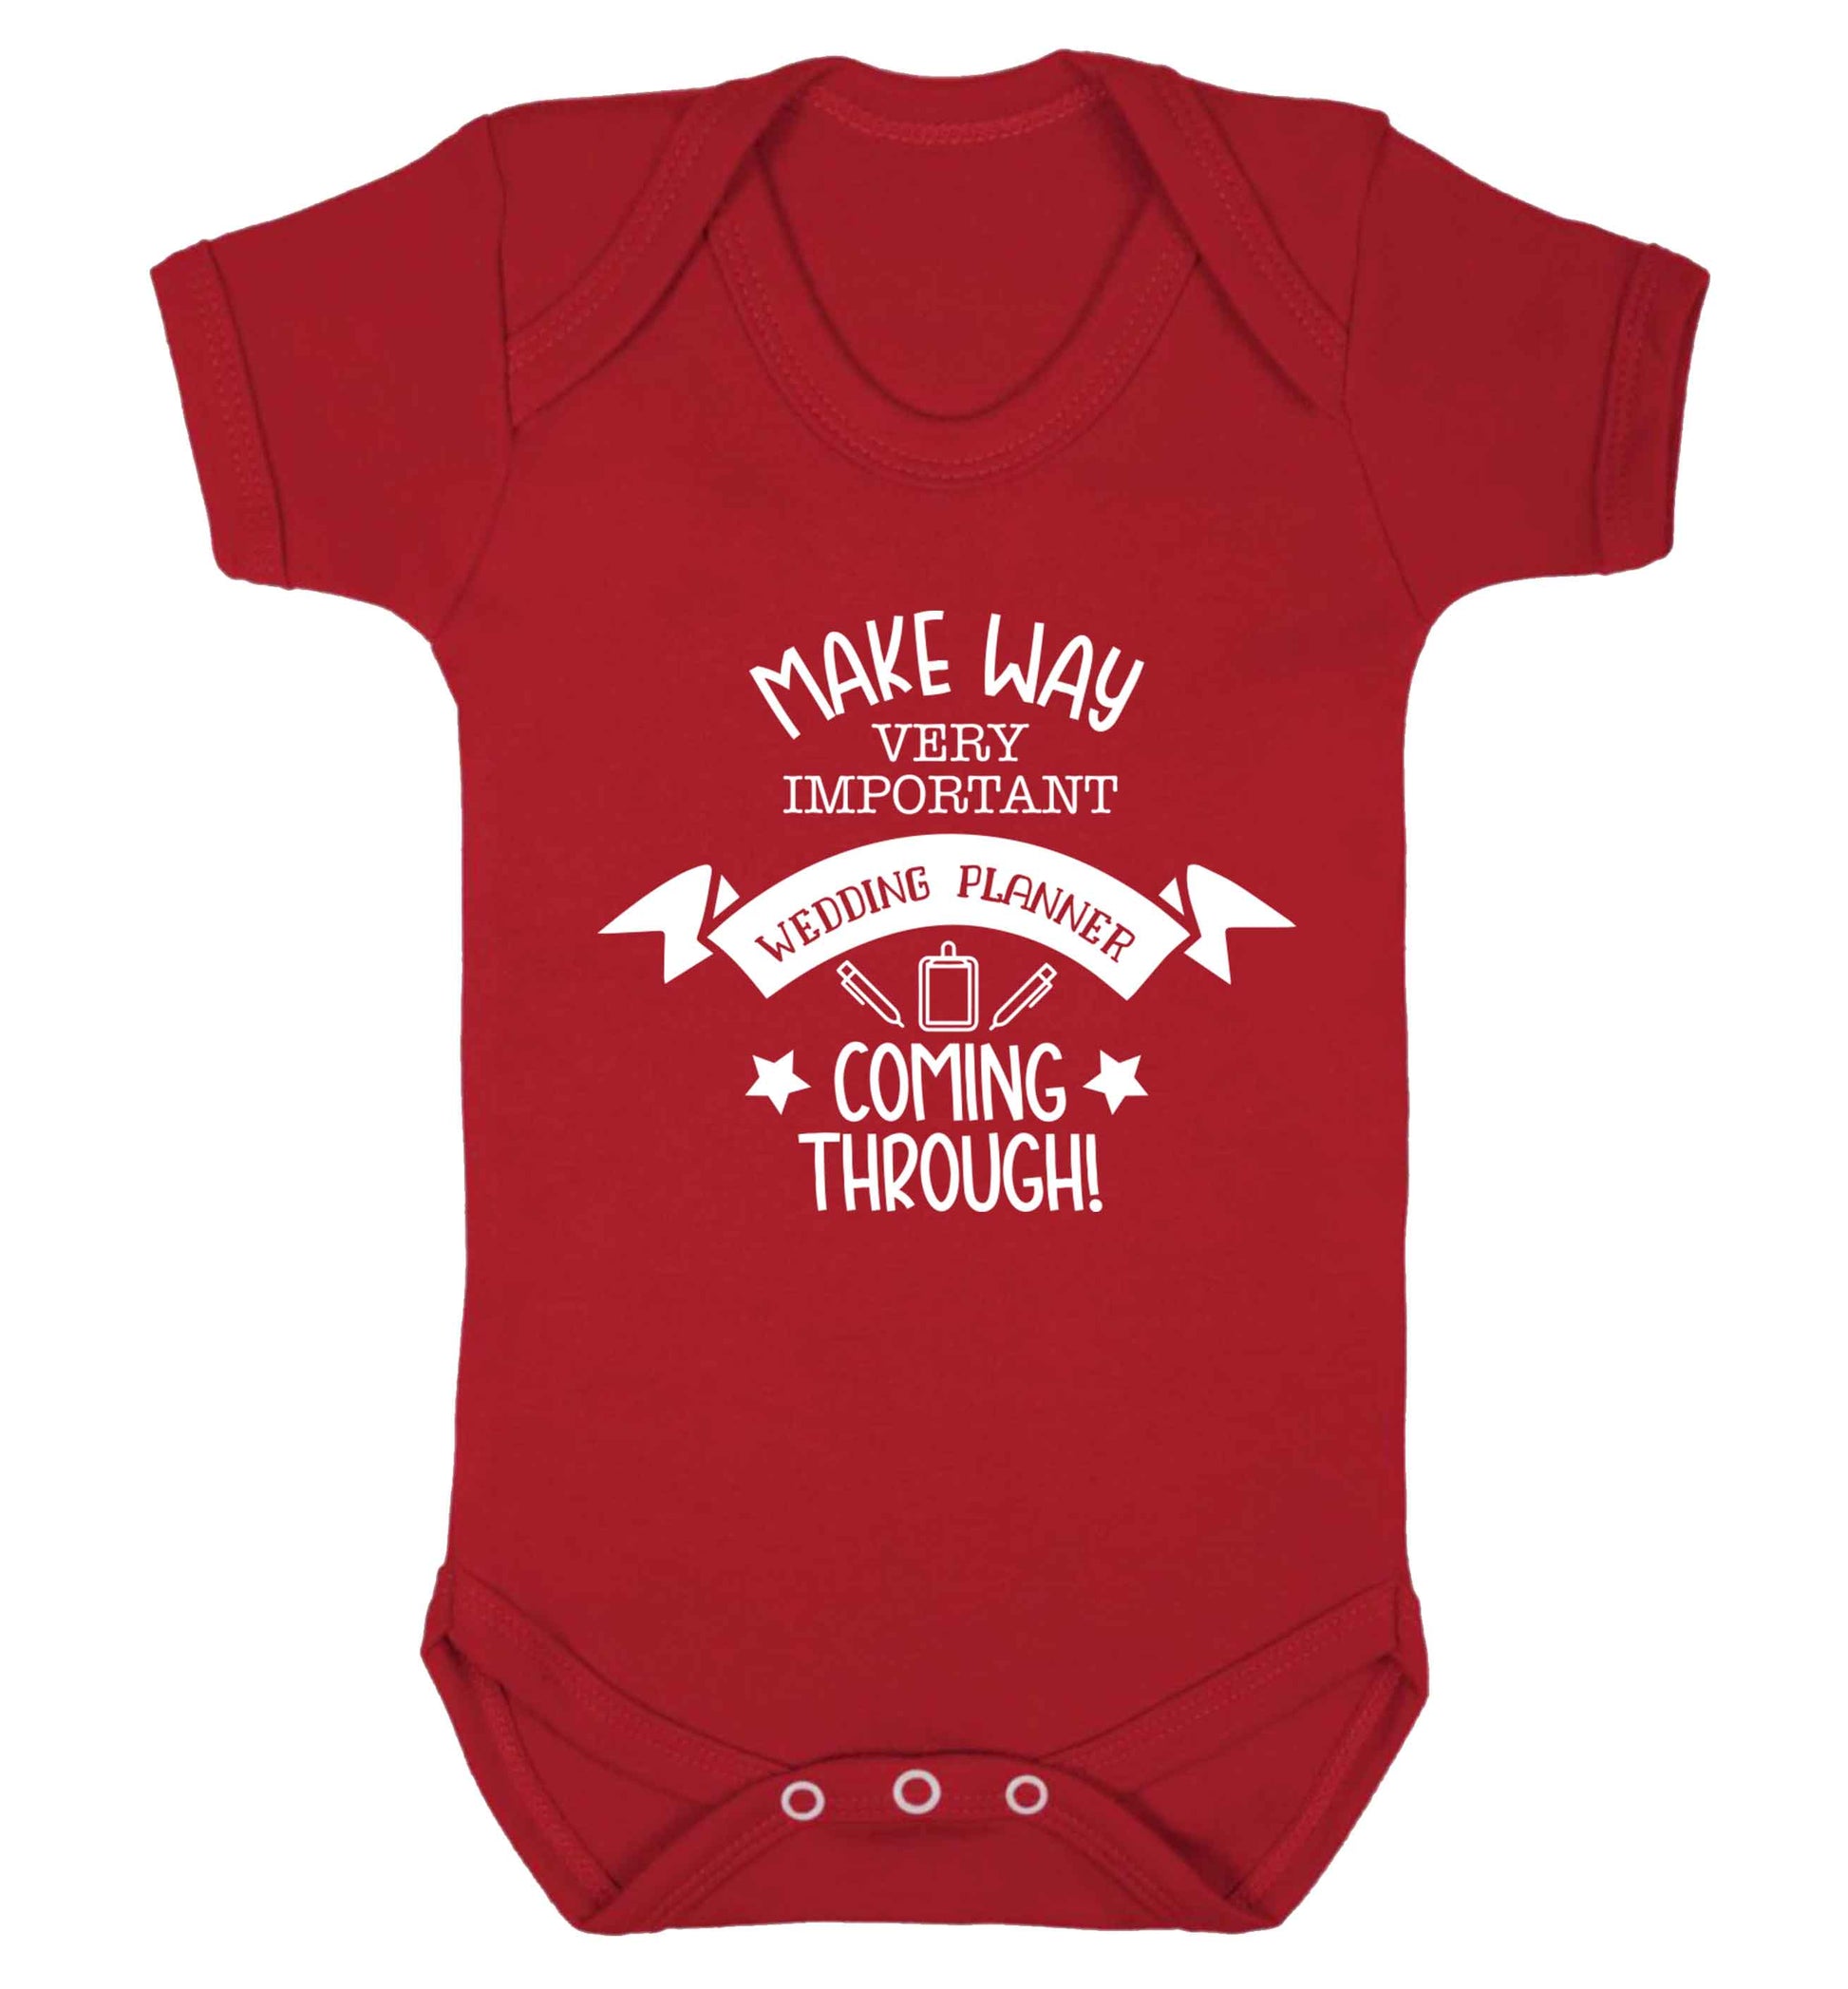 Make way very important wedding planner coming through Baby Vest red 18-24 months